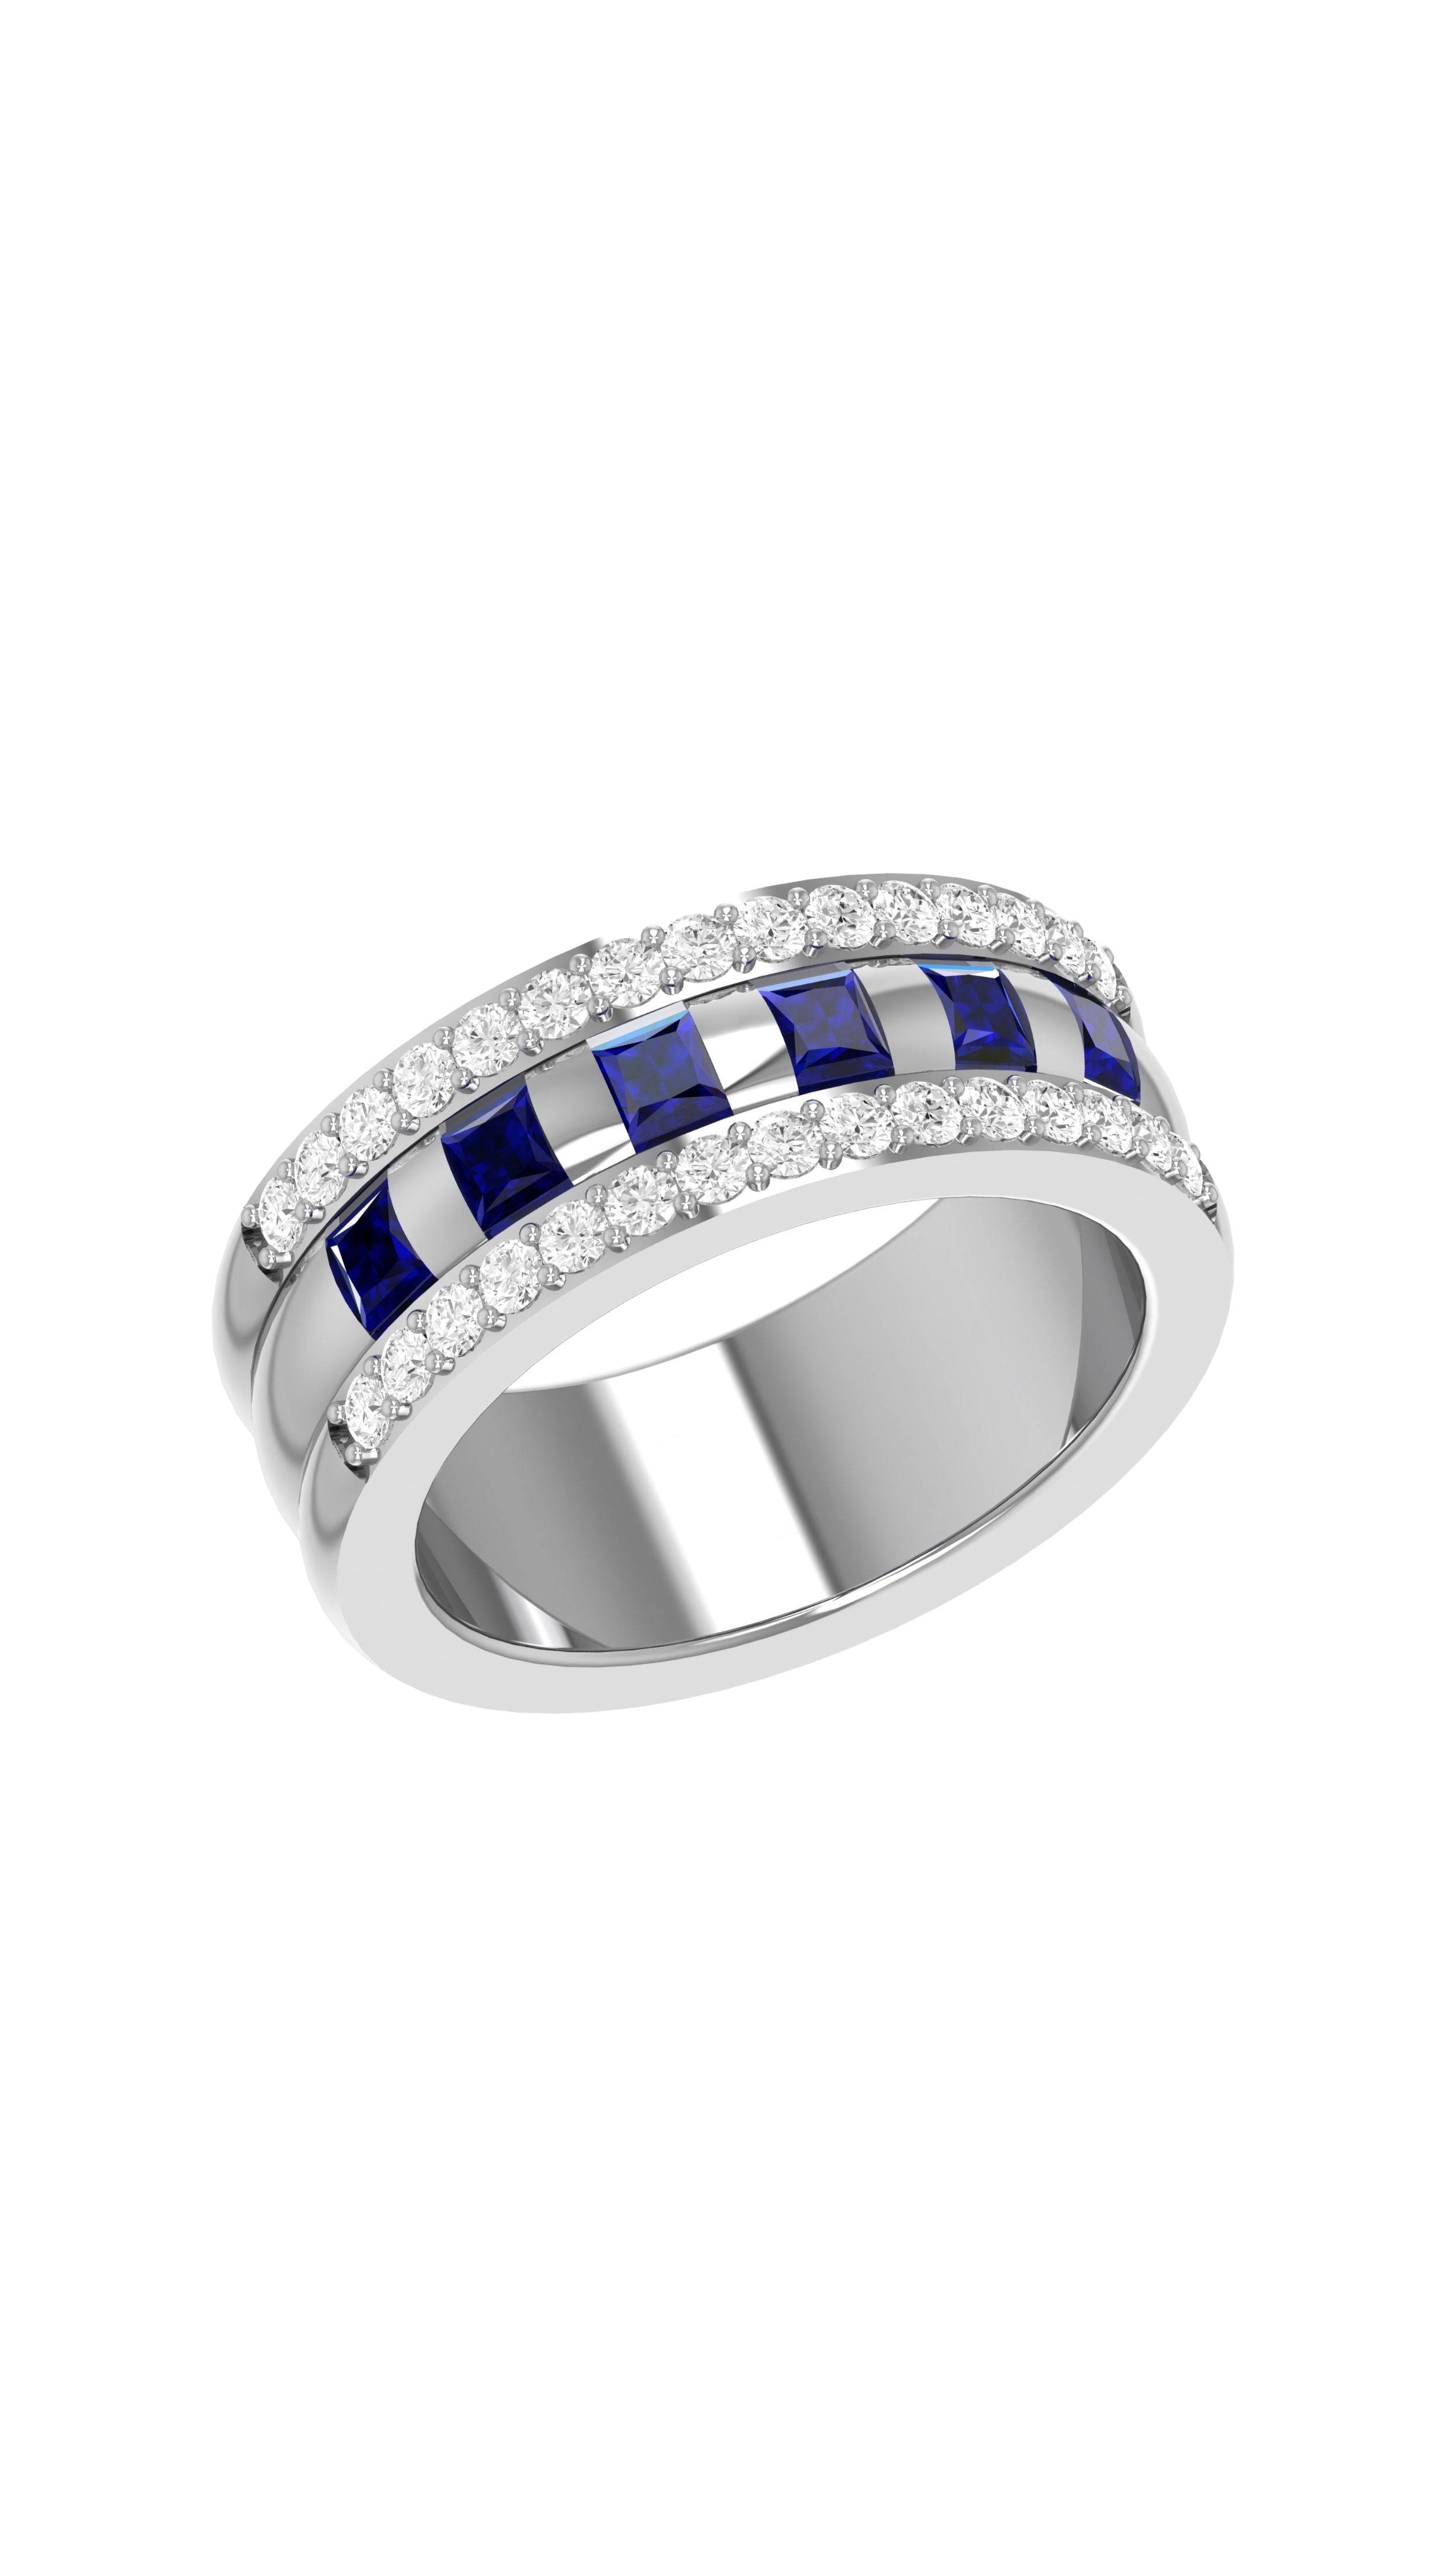 Conde de diamante Azura Ring. 18K white gold band ring with a center row of carré cut blue sapphires flanked on each side by bands of pave white diamonds. Product photo showing ring from front top